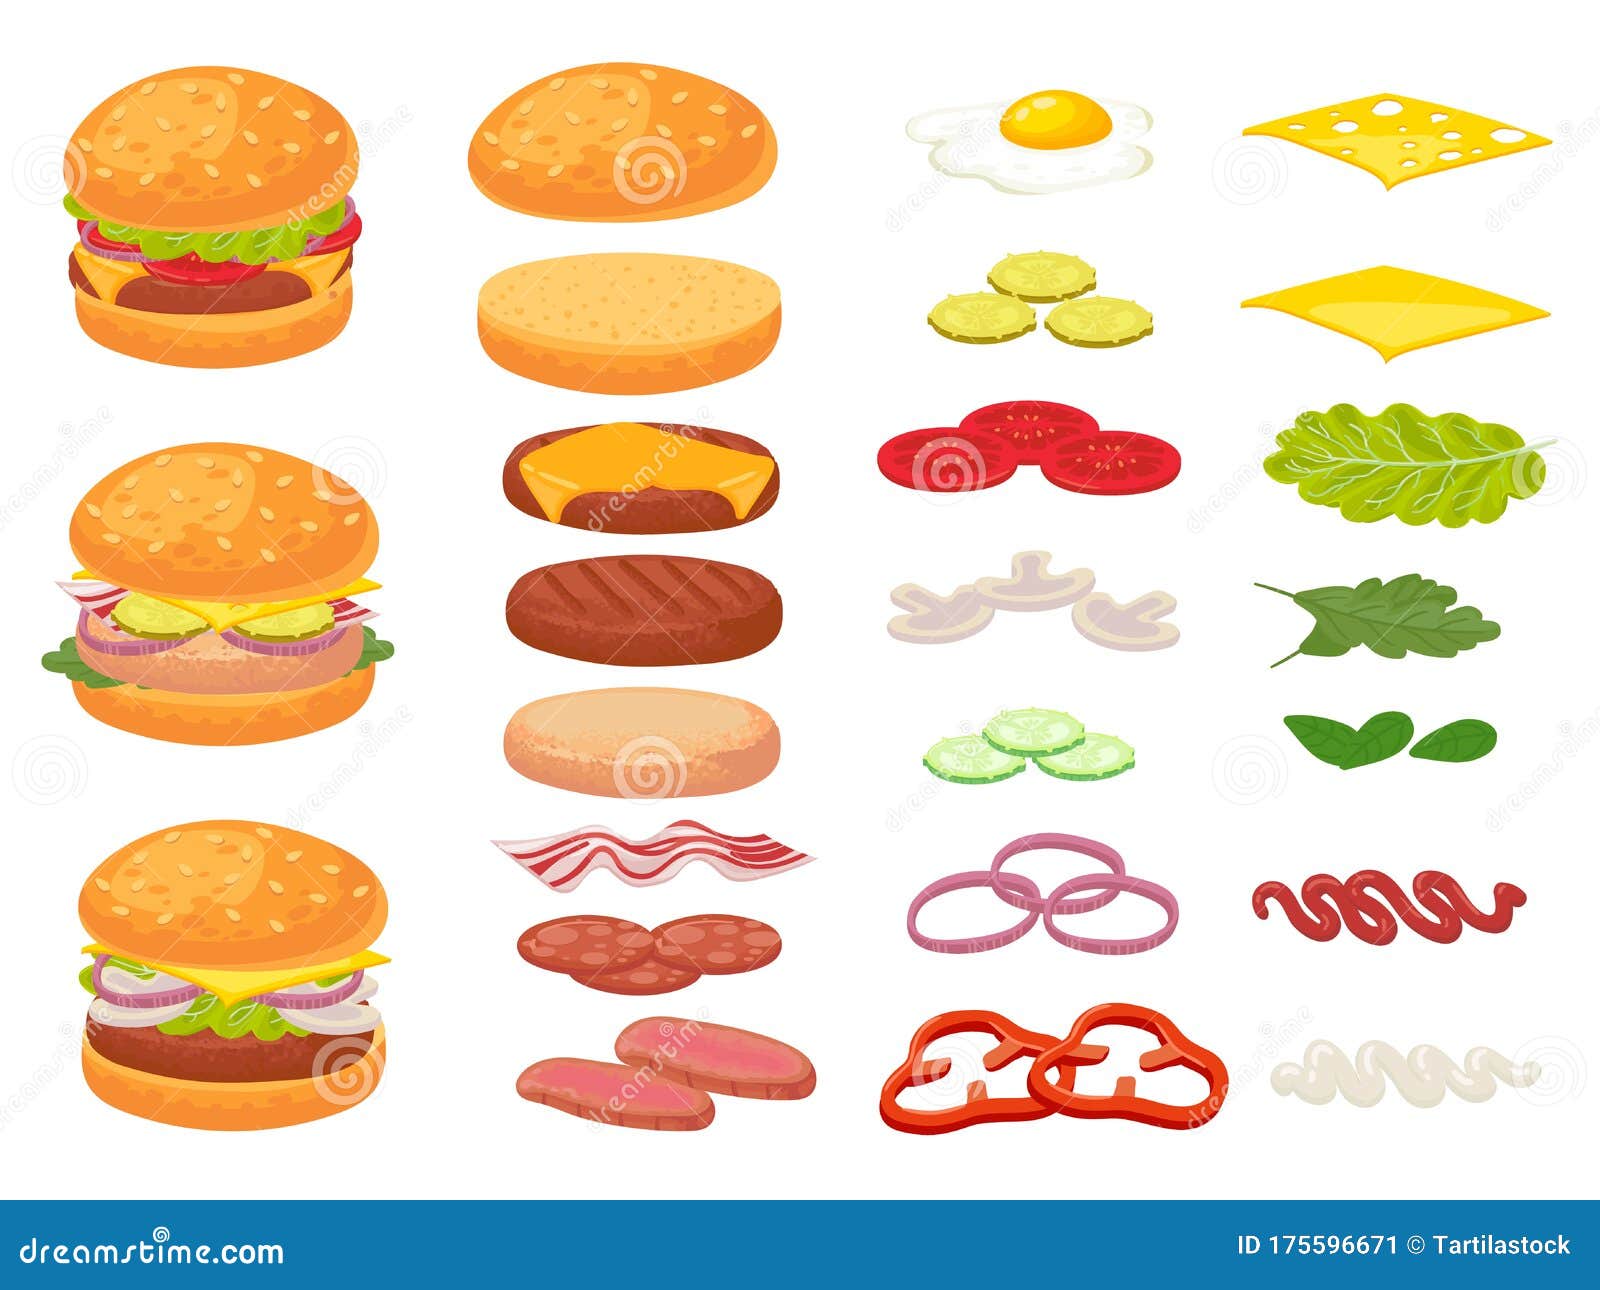 Cartoon Burger Ingredients. Hamburger, Chop Bun and Tomato. Ham, Fresh  Pickles and Cheese Slices Stock Vector - Illustration of fresh, background:  175596671